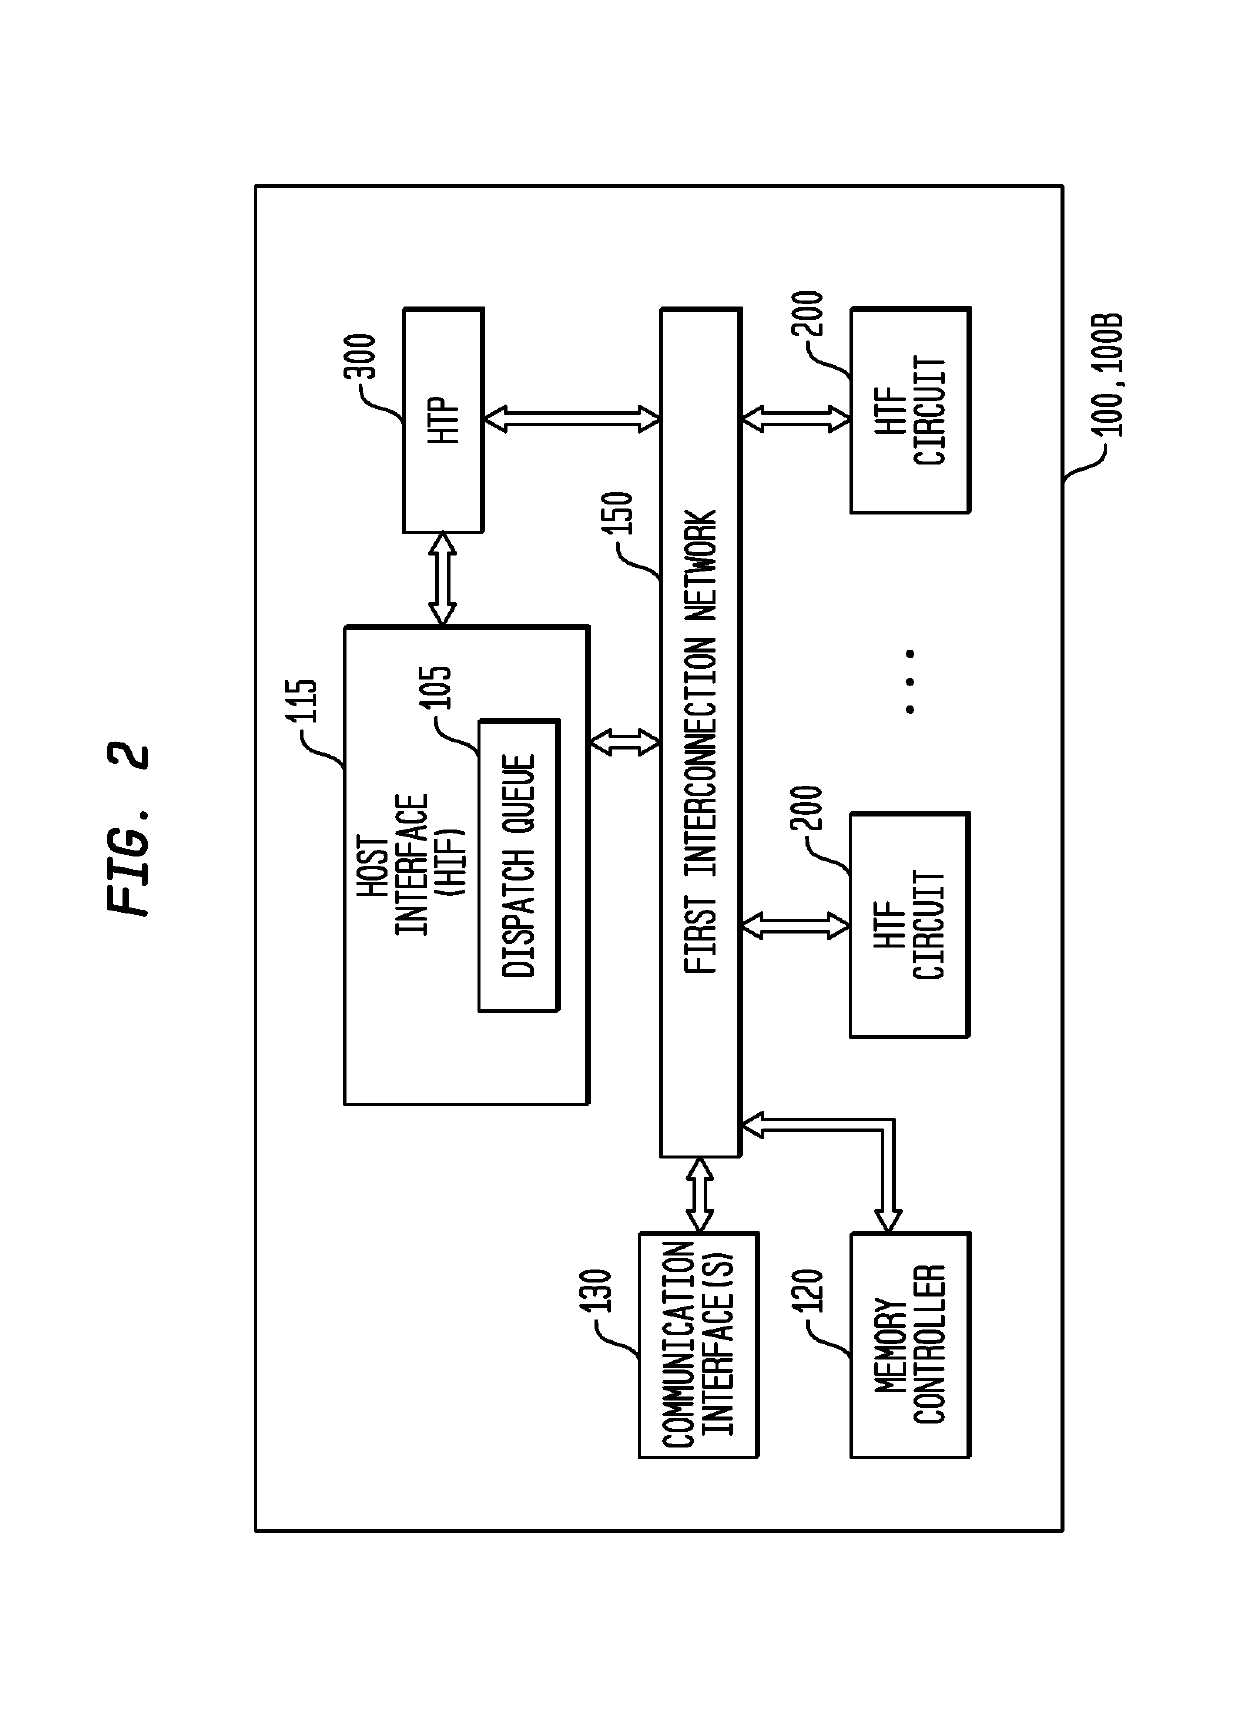 Execution Control of a Multi-Threaded, Self-Scheduling Reconfigurable Computing Fabric